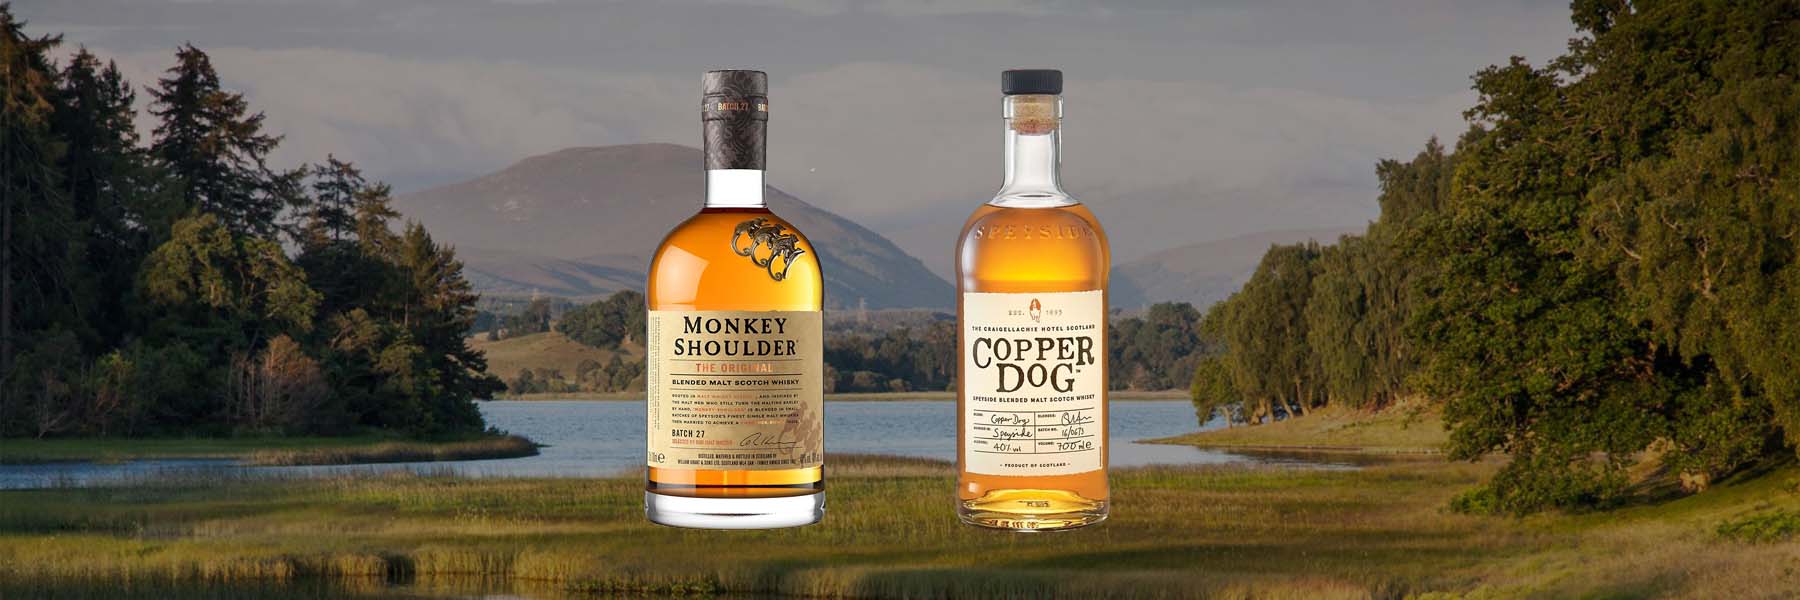 Copper Dog vs Monkey Shoulder | Which Speyside Blend is the Best?